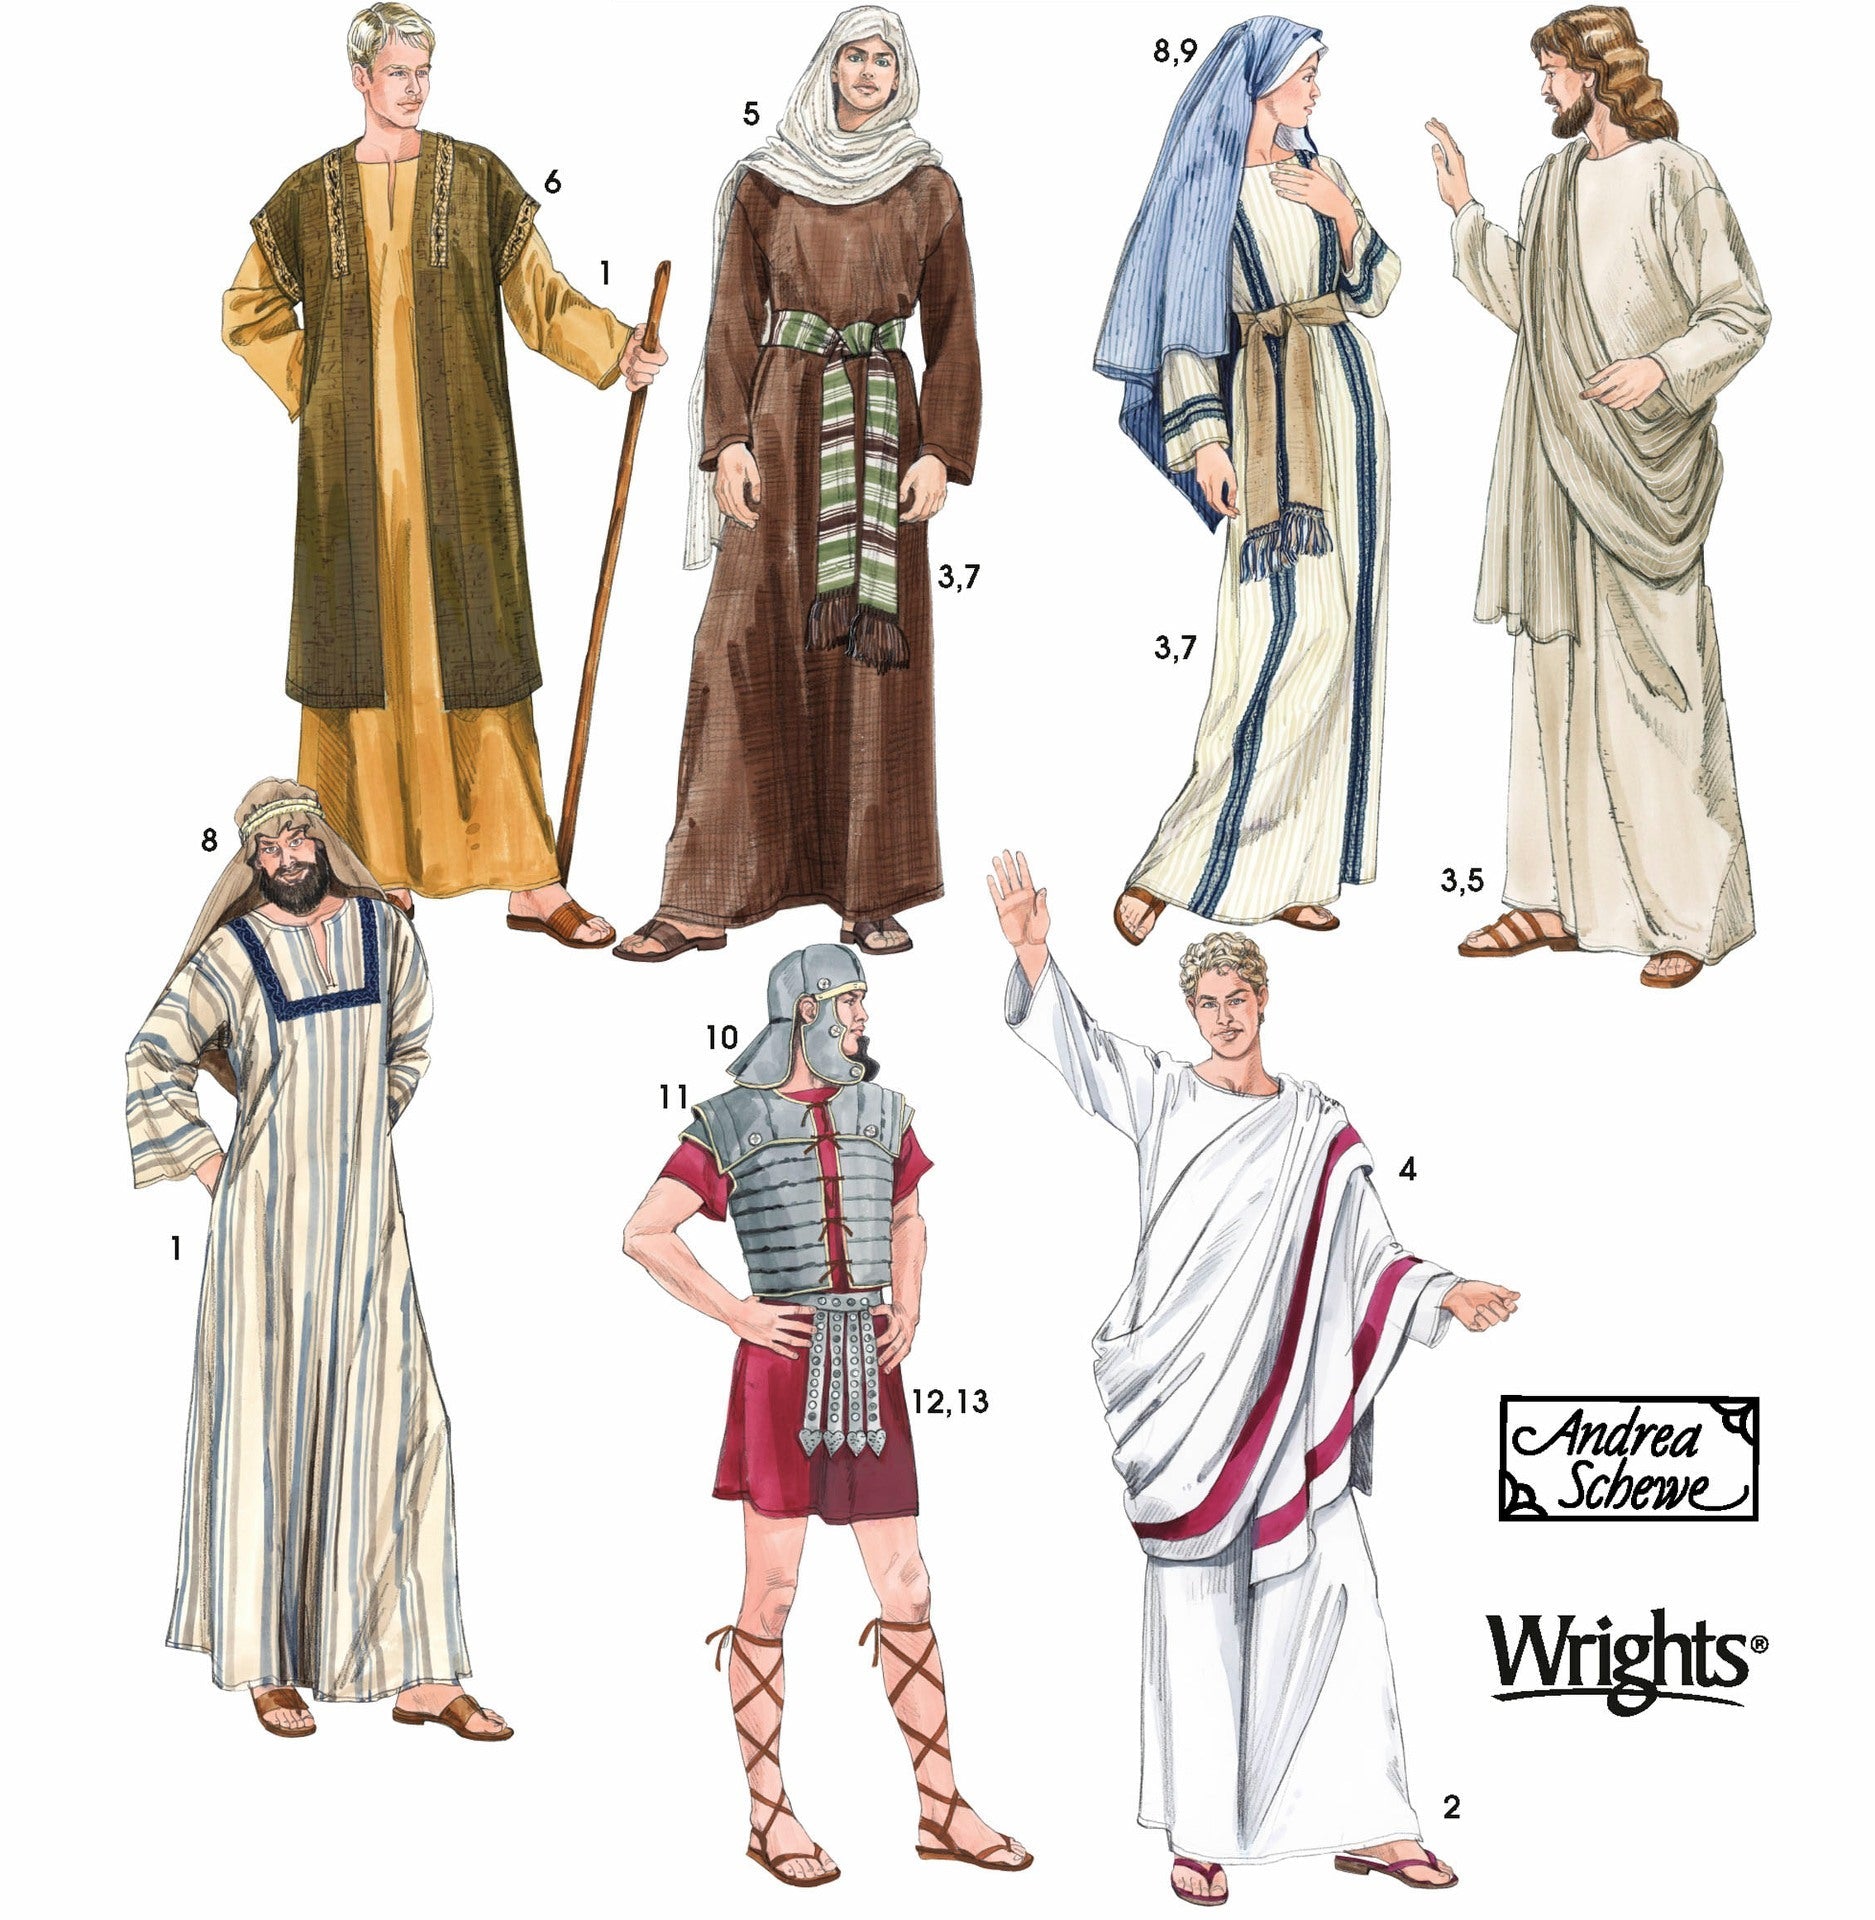 Simplicity Pattern 4213 Biblical costumes for men and women. from Jaycotts Sewing Supplies